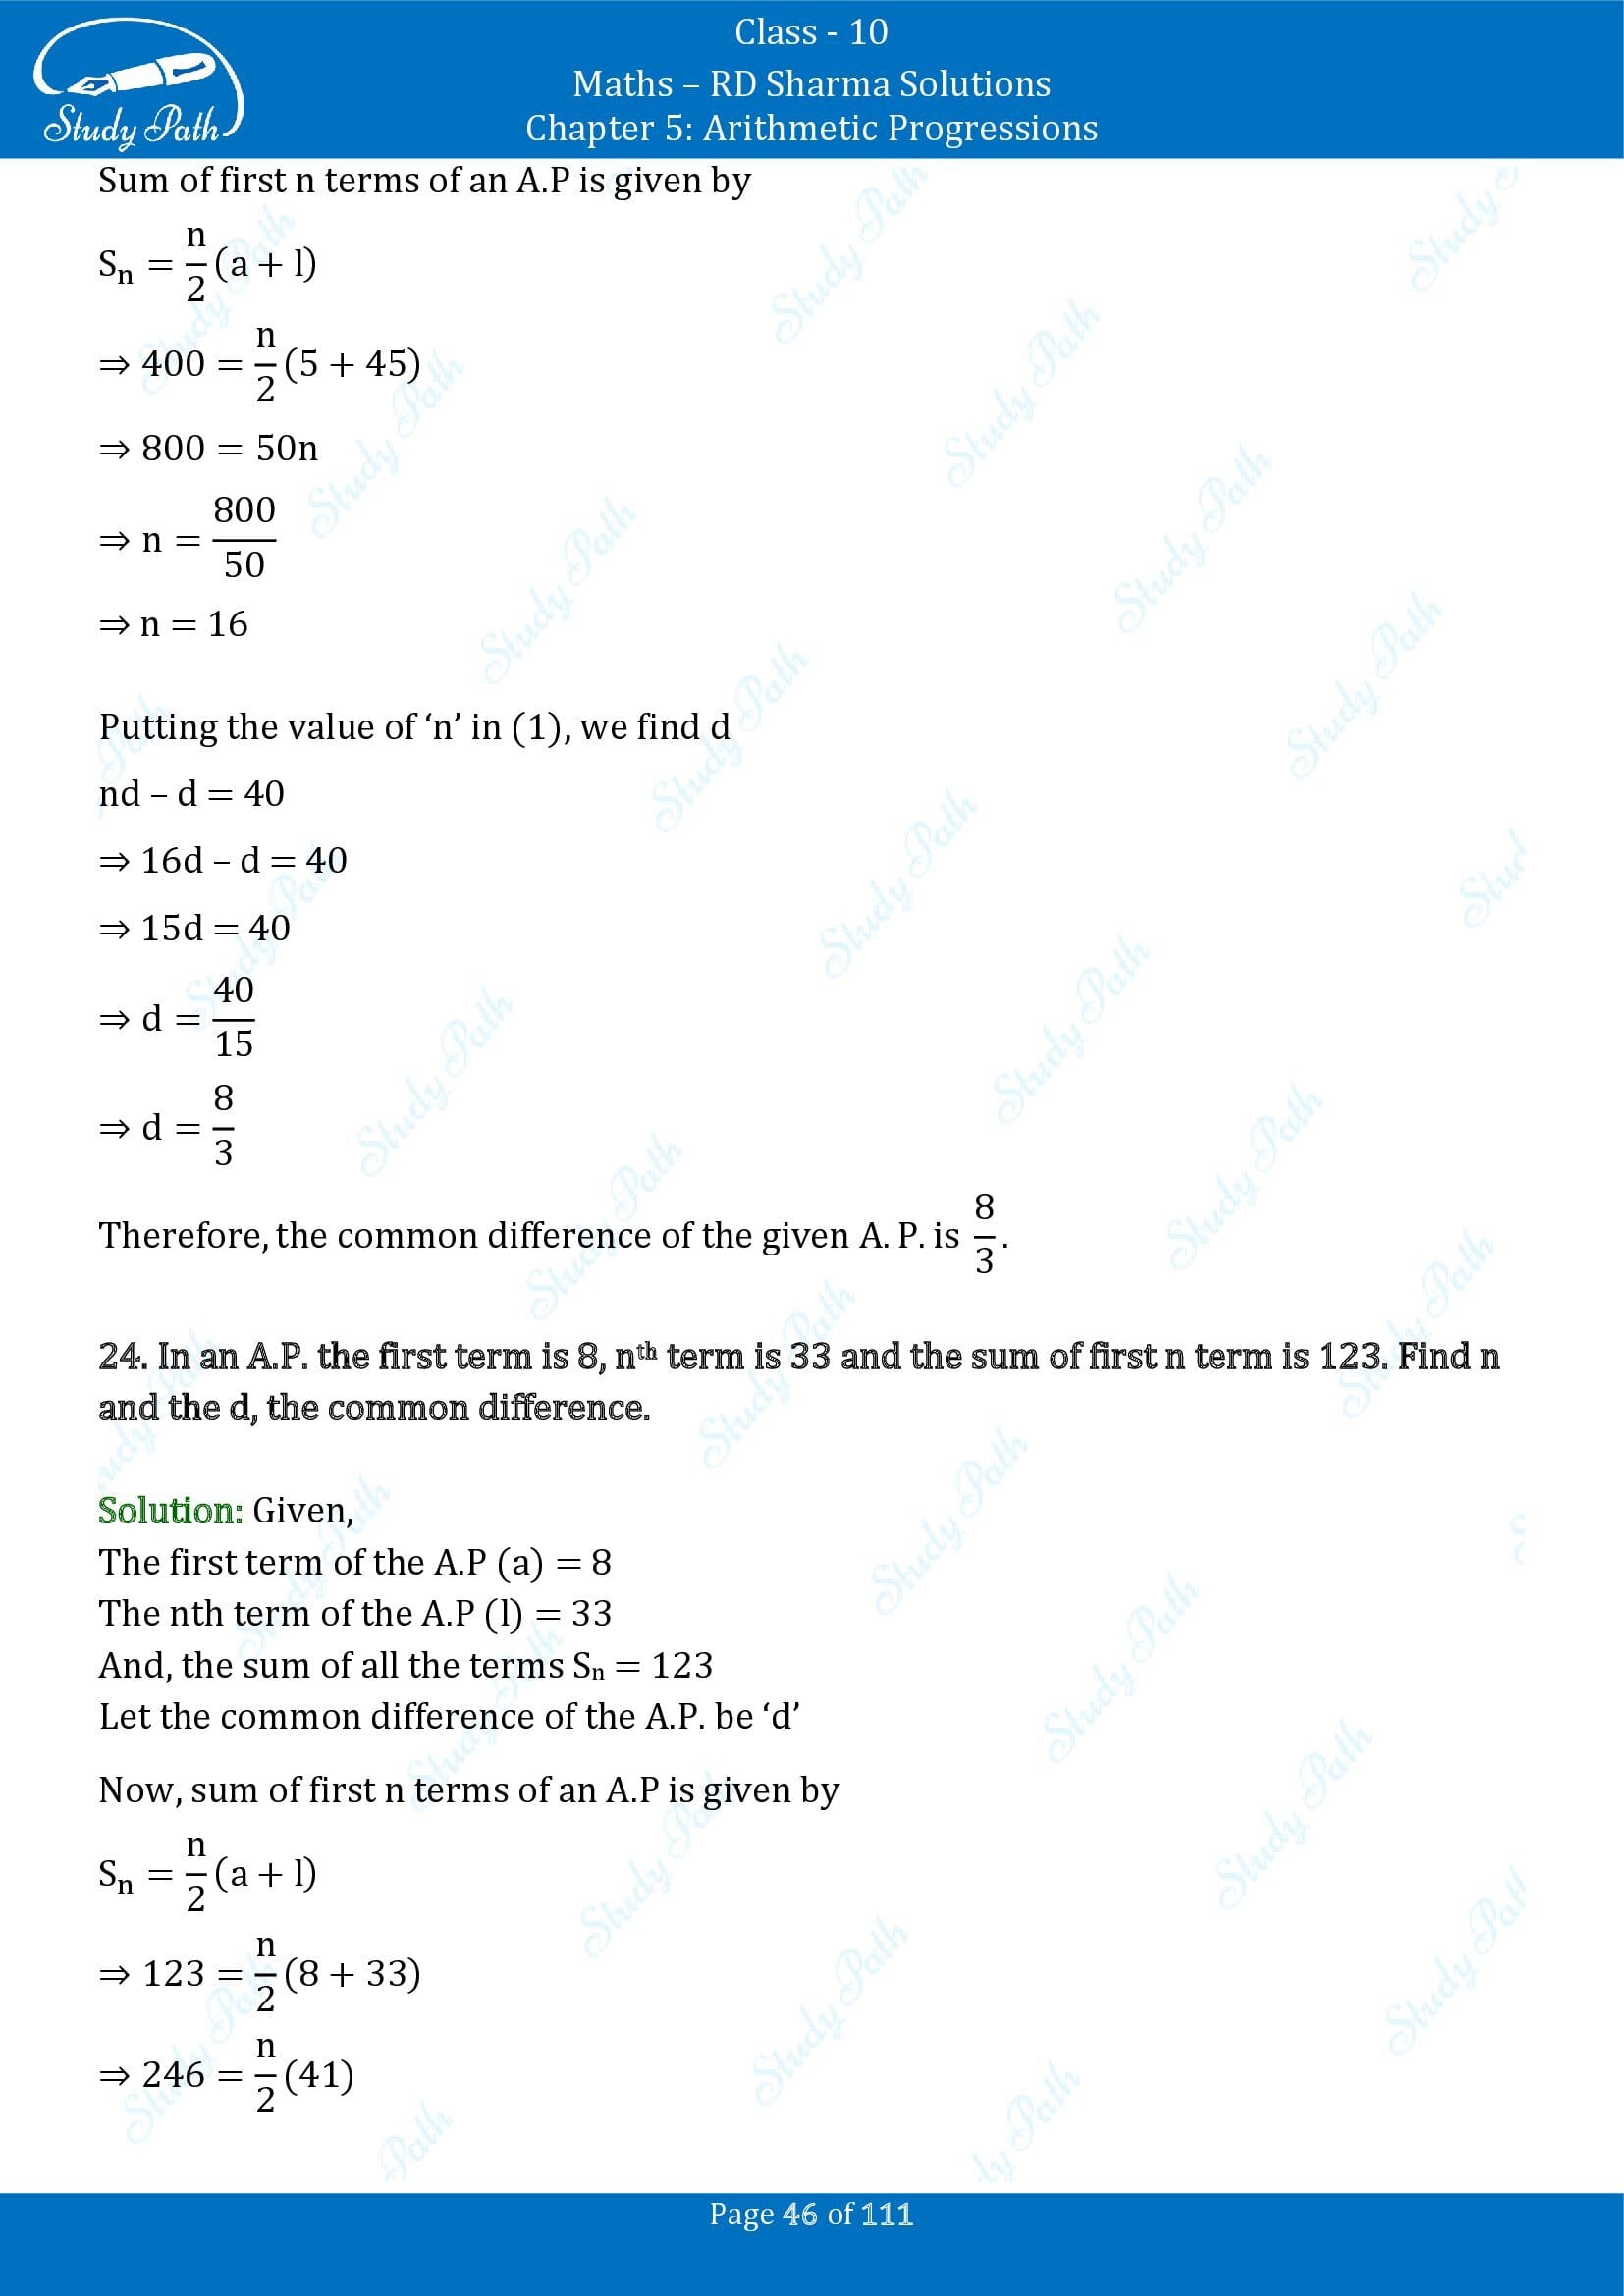 RD Sharma Solutions Class 10 Chapter 5 Arithmetic Progressions Exercise 5.6 00046